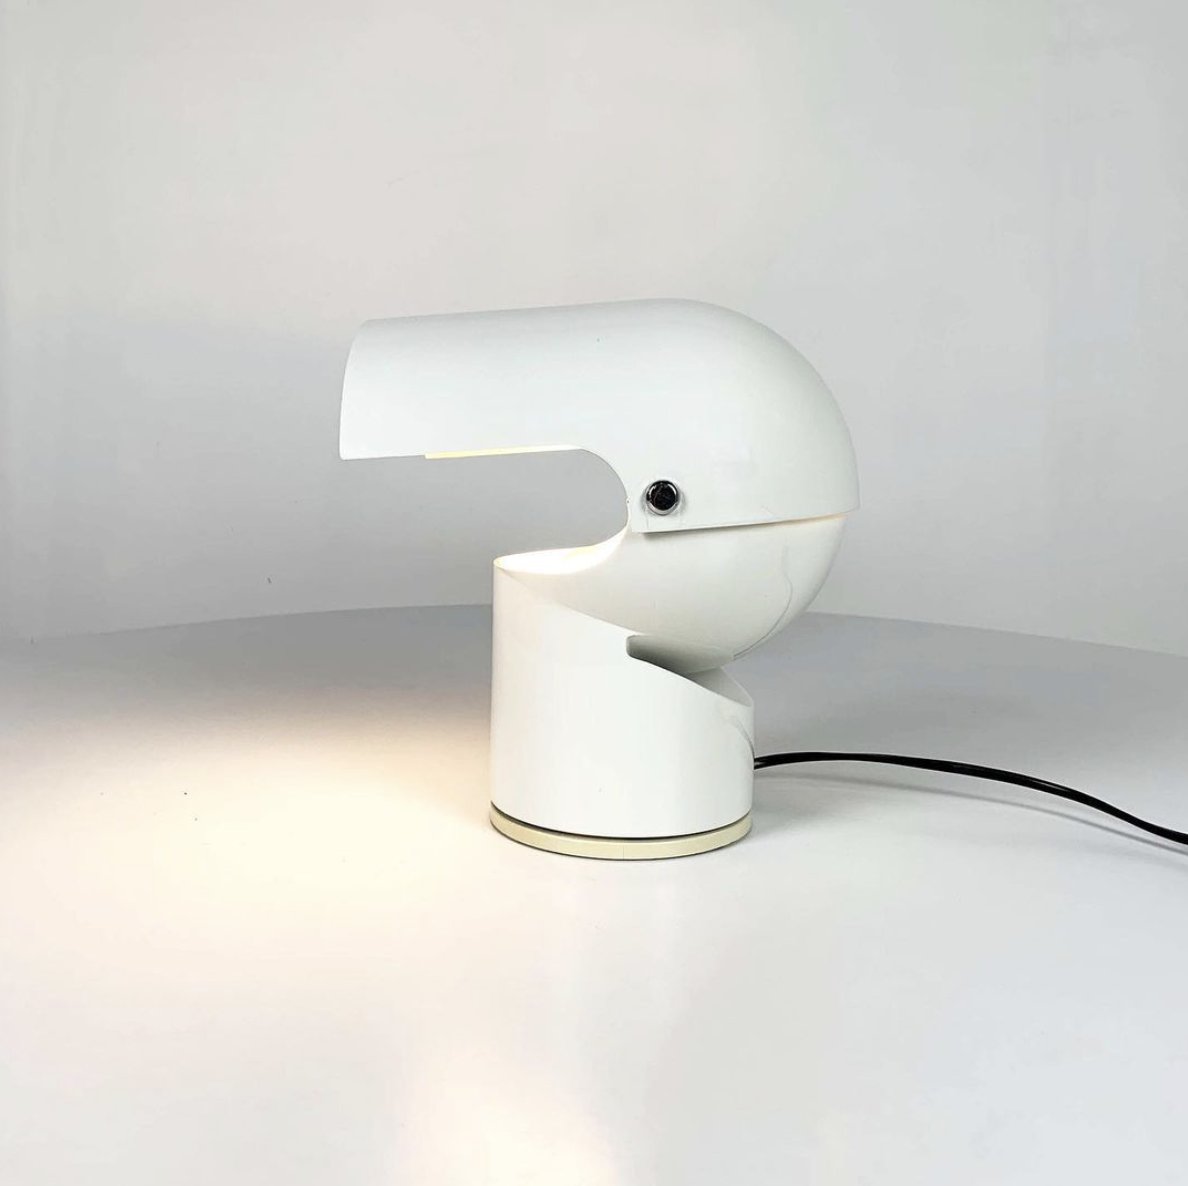 A more common piece found in many "modernist" vintage shops is the "Pileino."Another demonstration of her "styleless" approach to design. This bauhaus lamp reflects both it's era in style and materials, as well as the understated approach of Gae's practice.